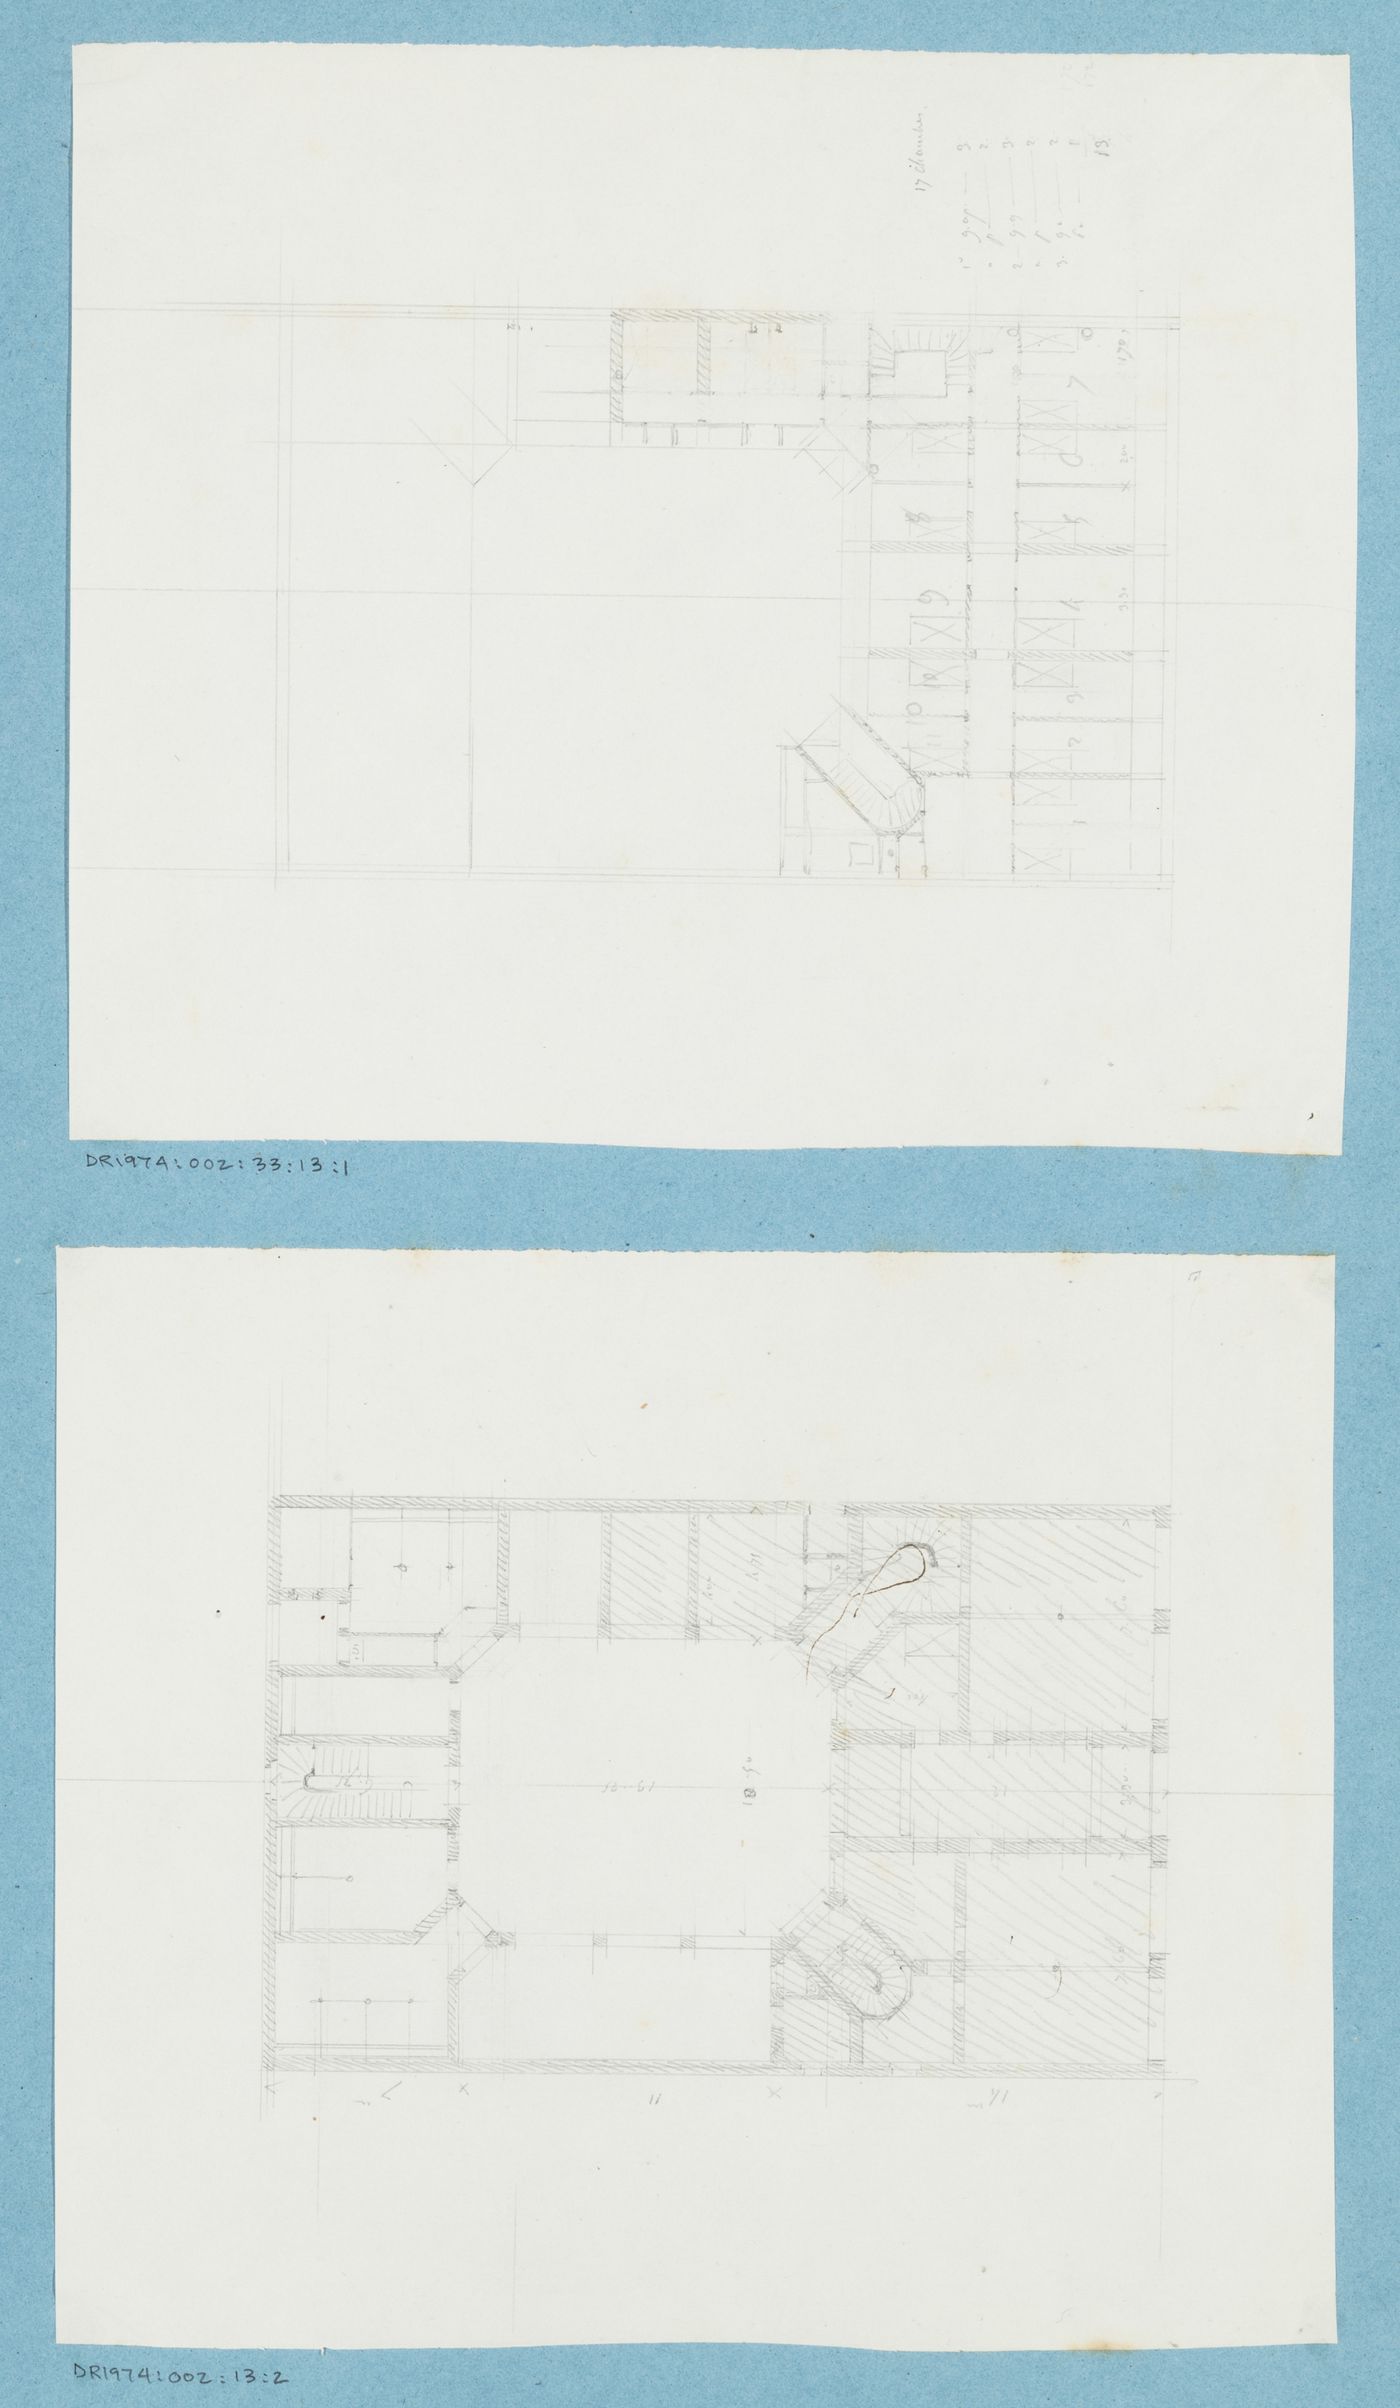 Project for a hôtel for M. Busche: Plans for a four-storey hôtel with a central courtyard